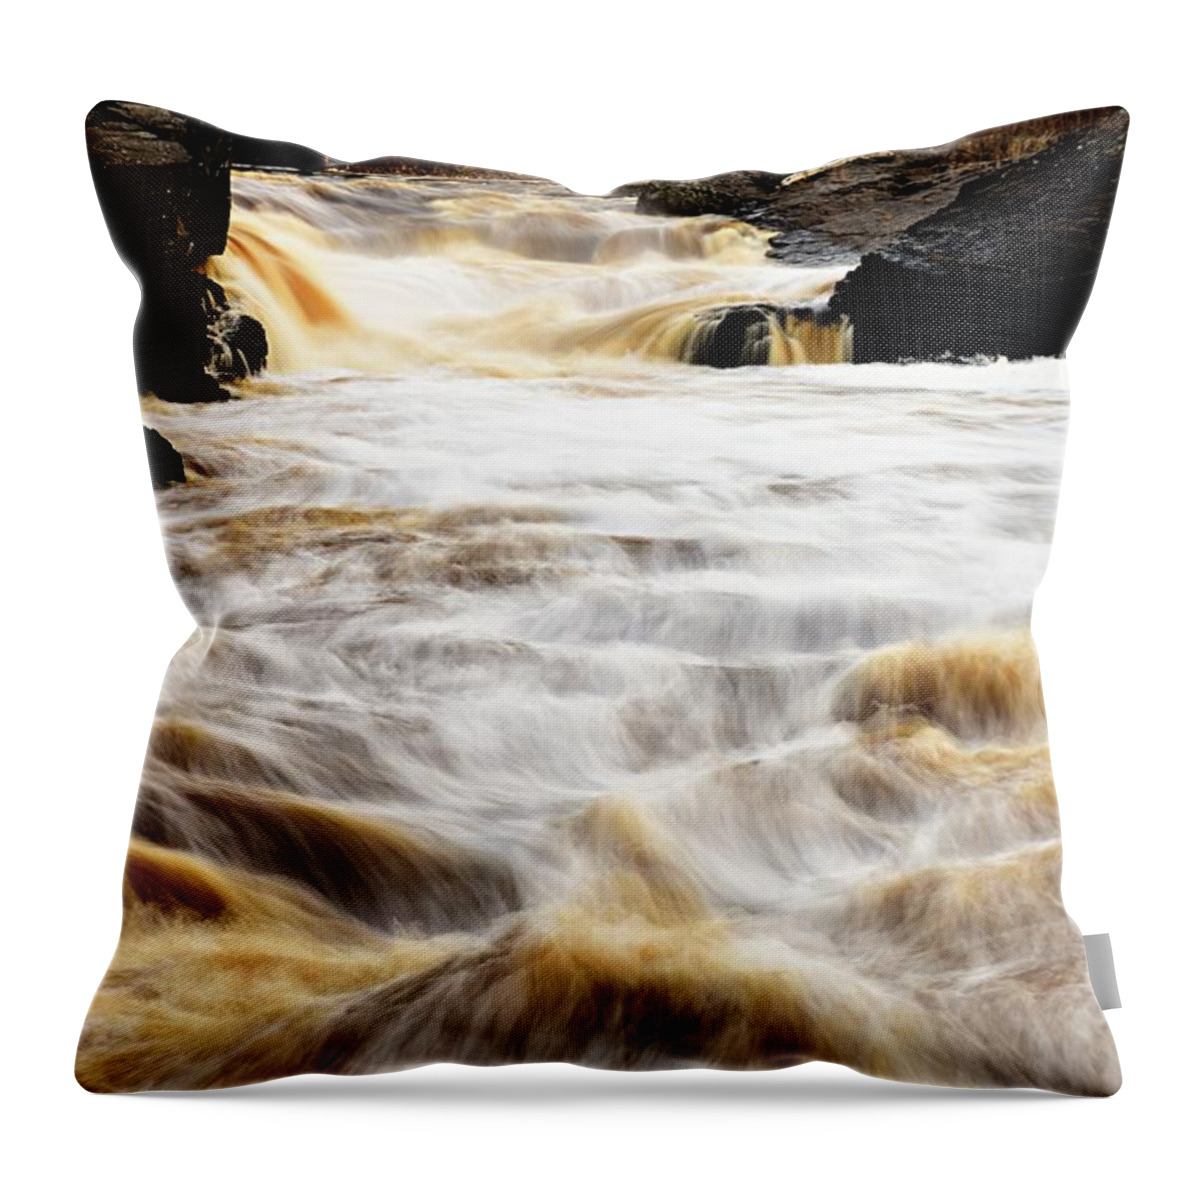 Photography Throw Pillow featuring the photograph St Louis River Waterfall by Larry Ricker